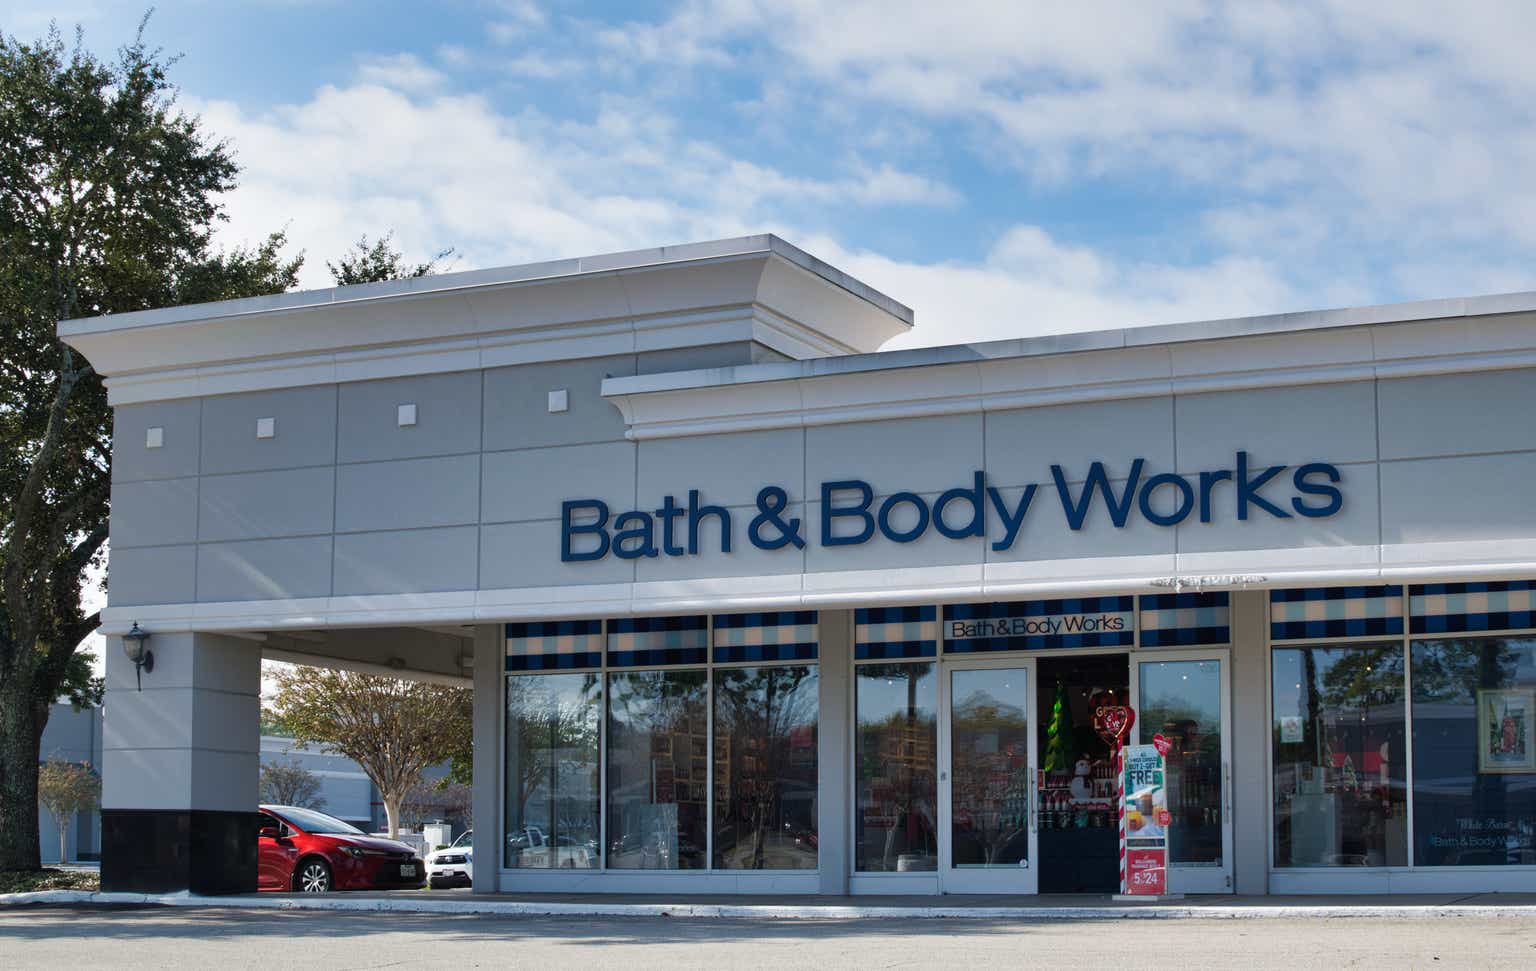 Bath & Body Works, Inc.: Strong Business, But Macroeconomic Pressures Remain